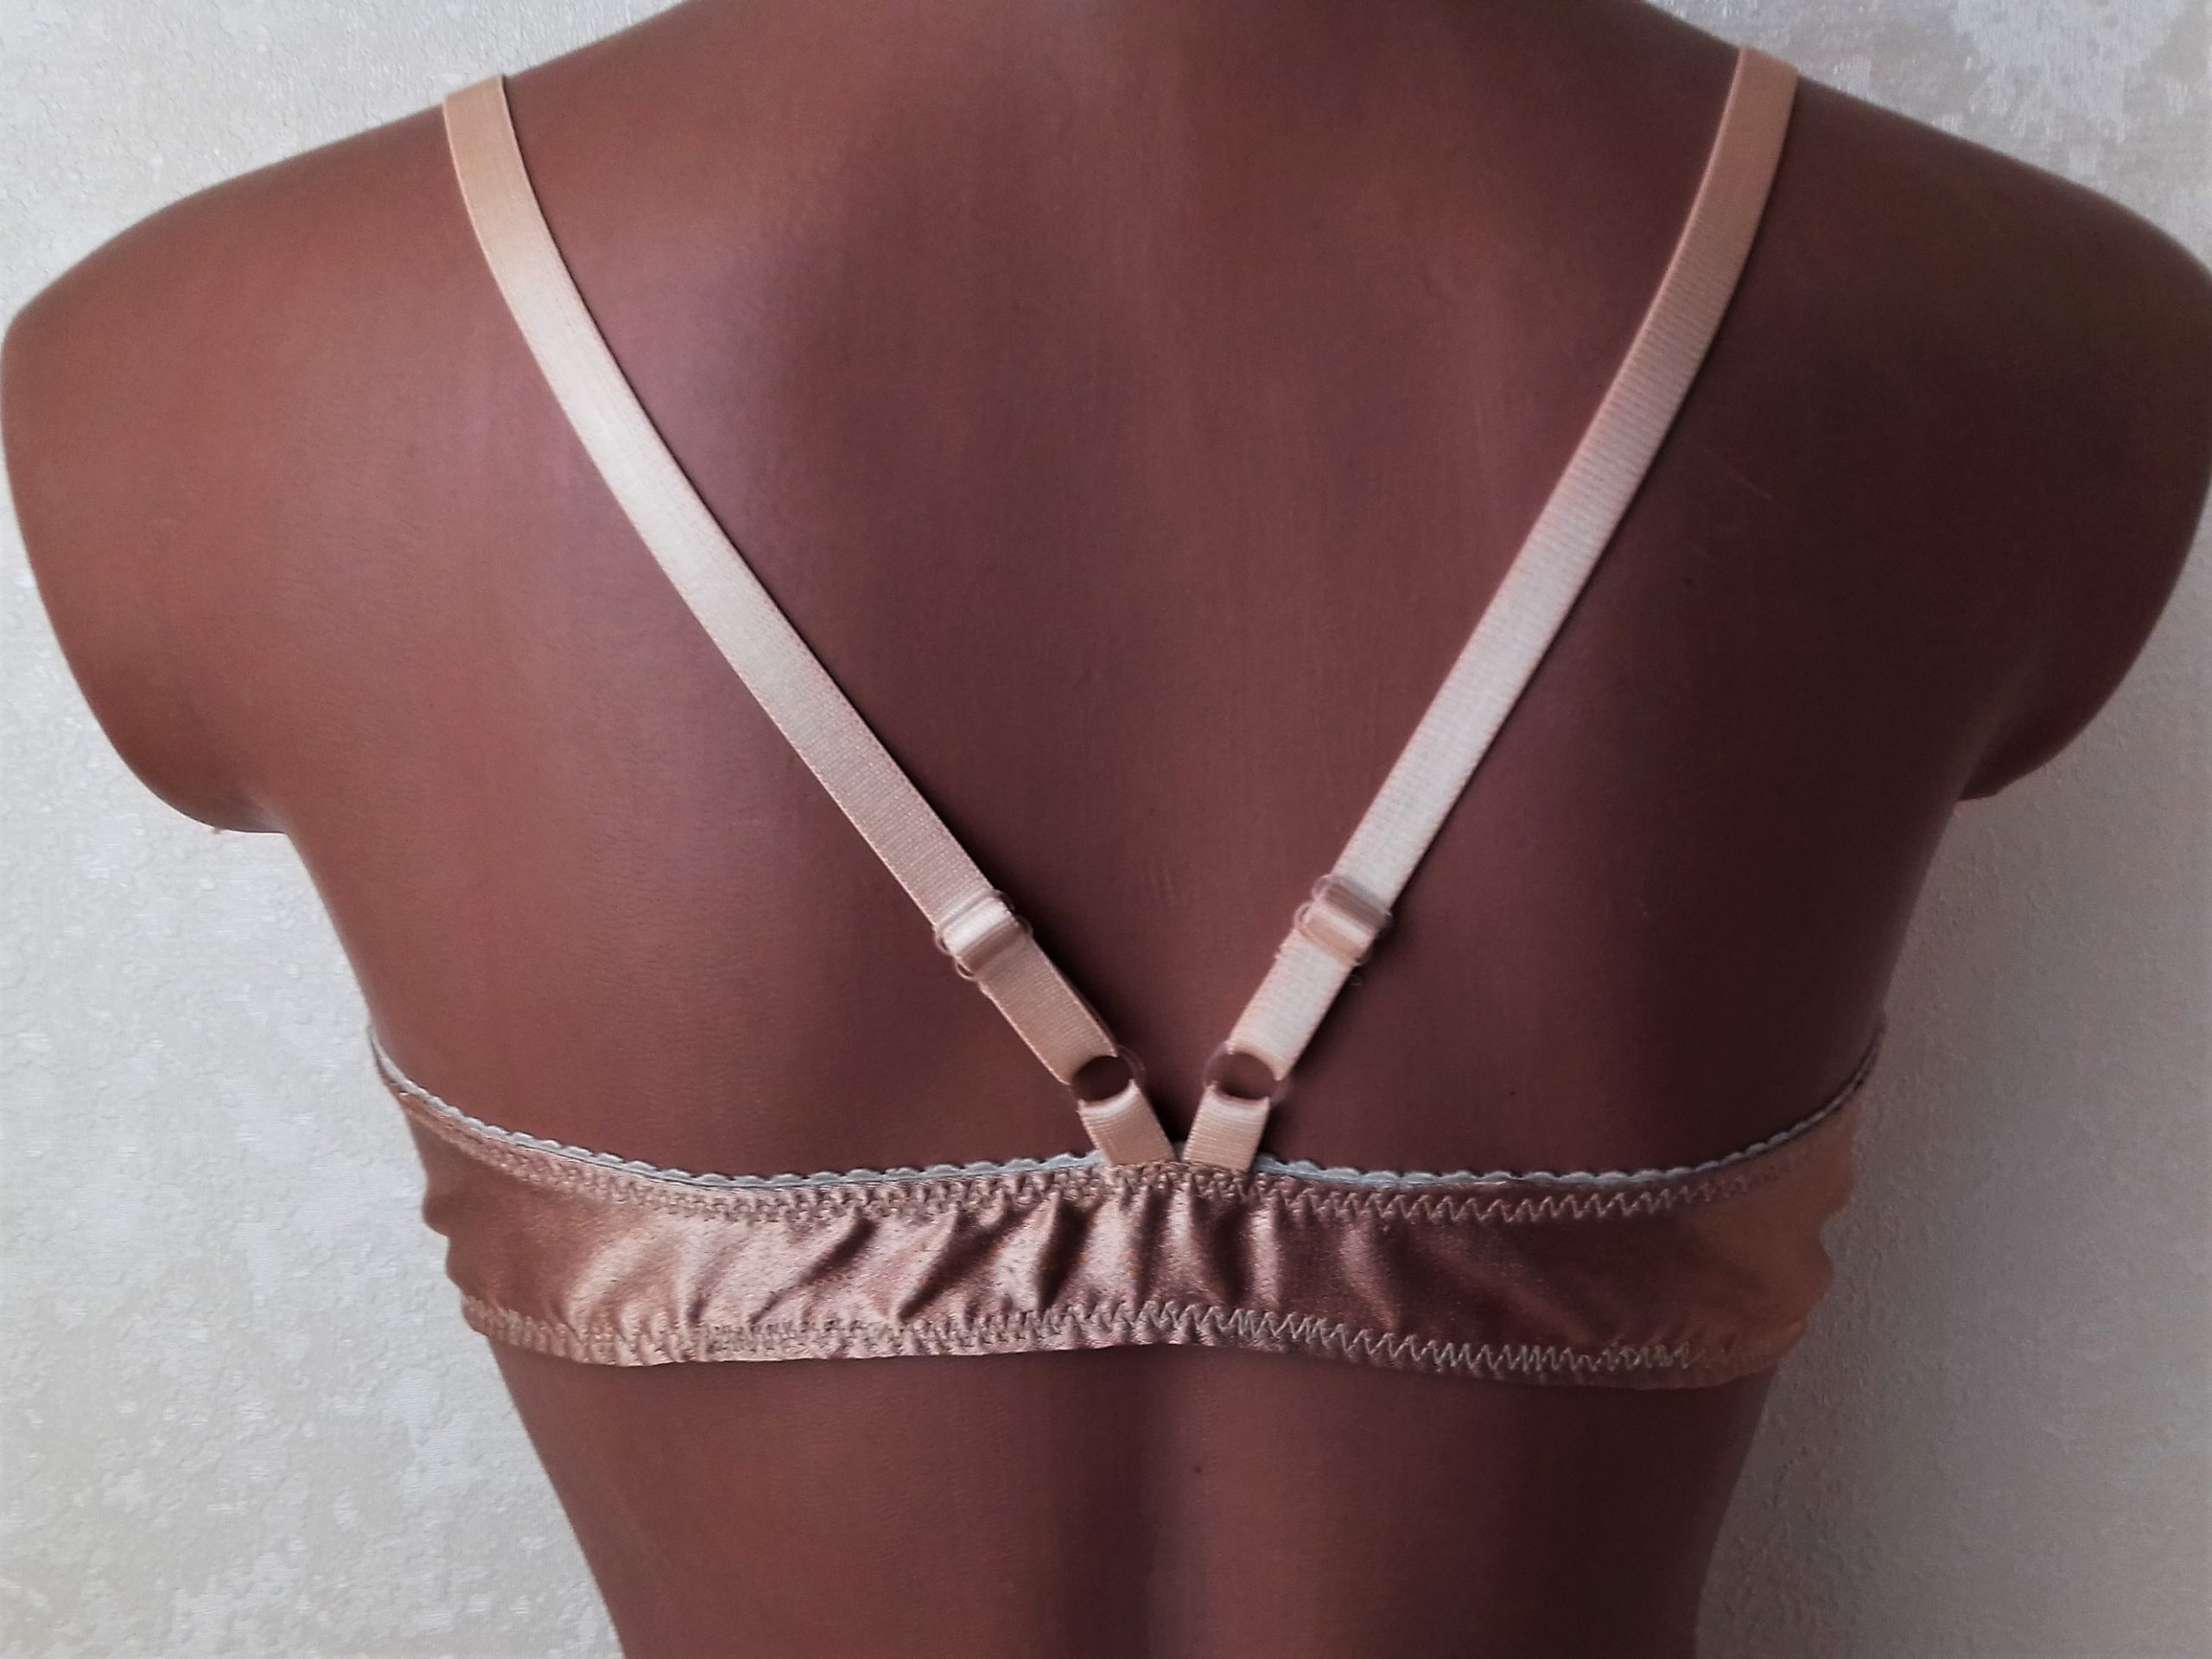 Locking Zipper - for all your front closing bra patterns